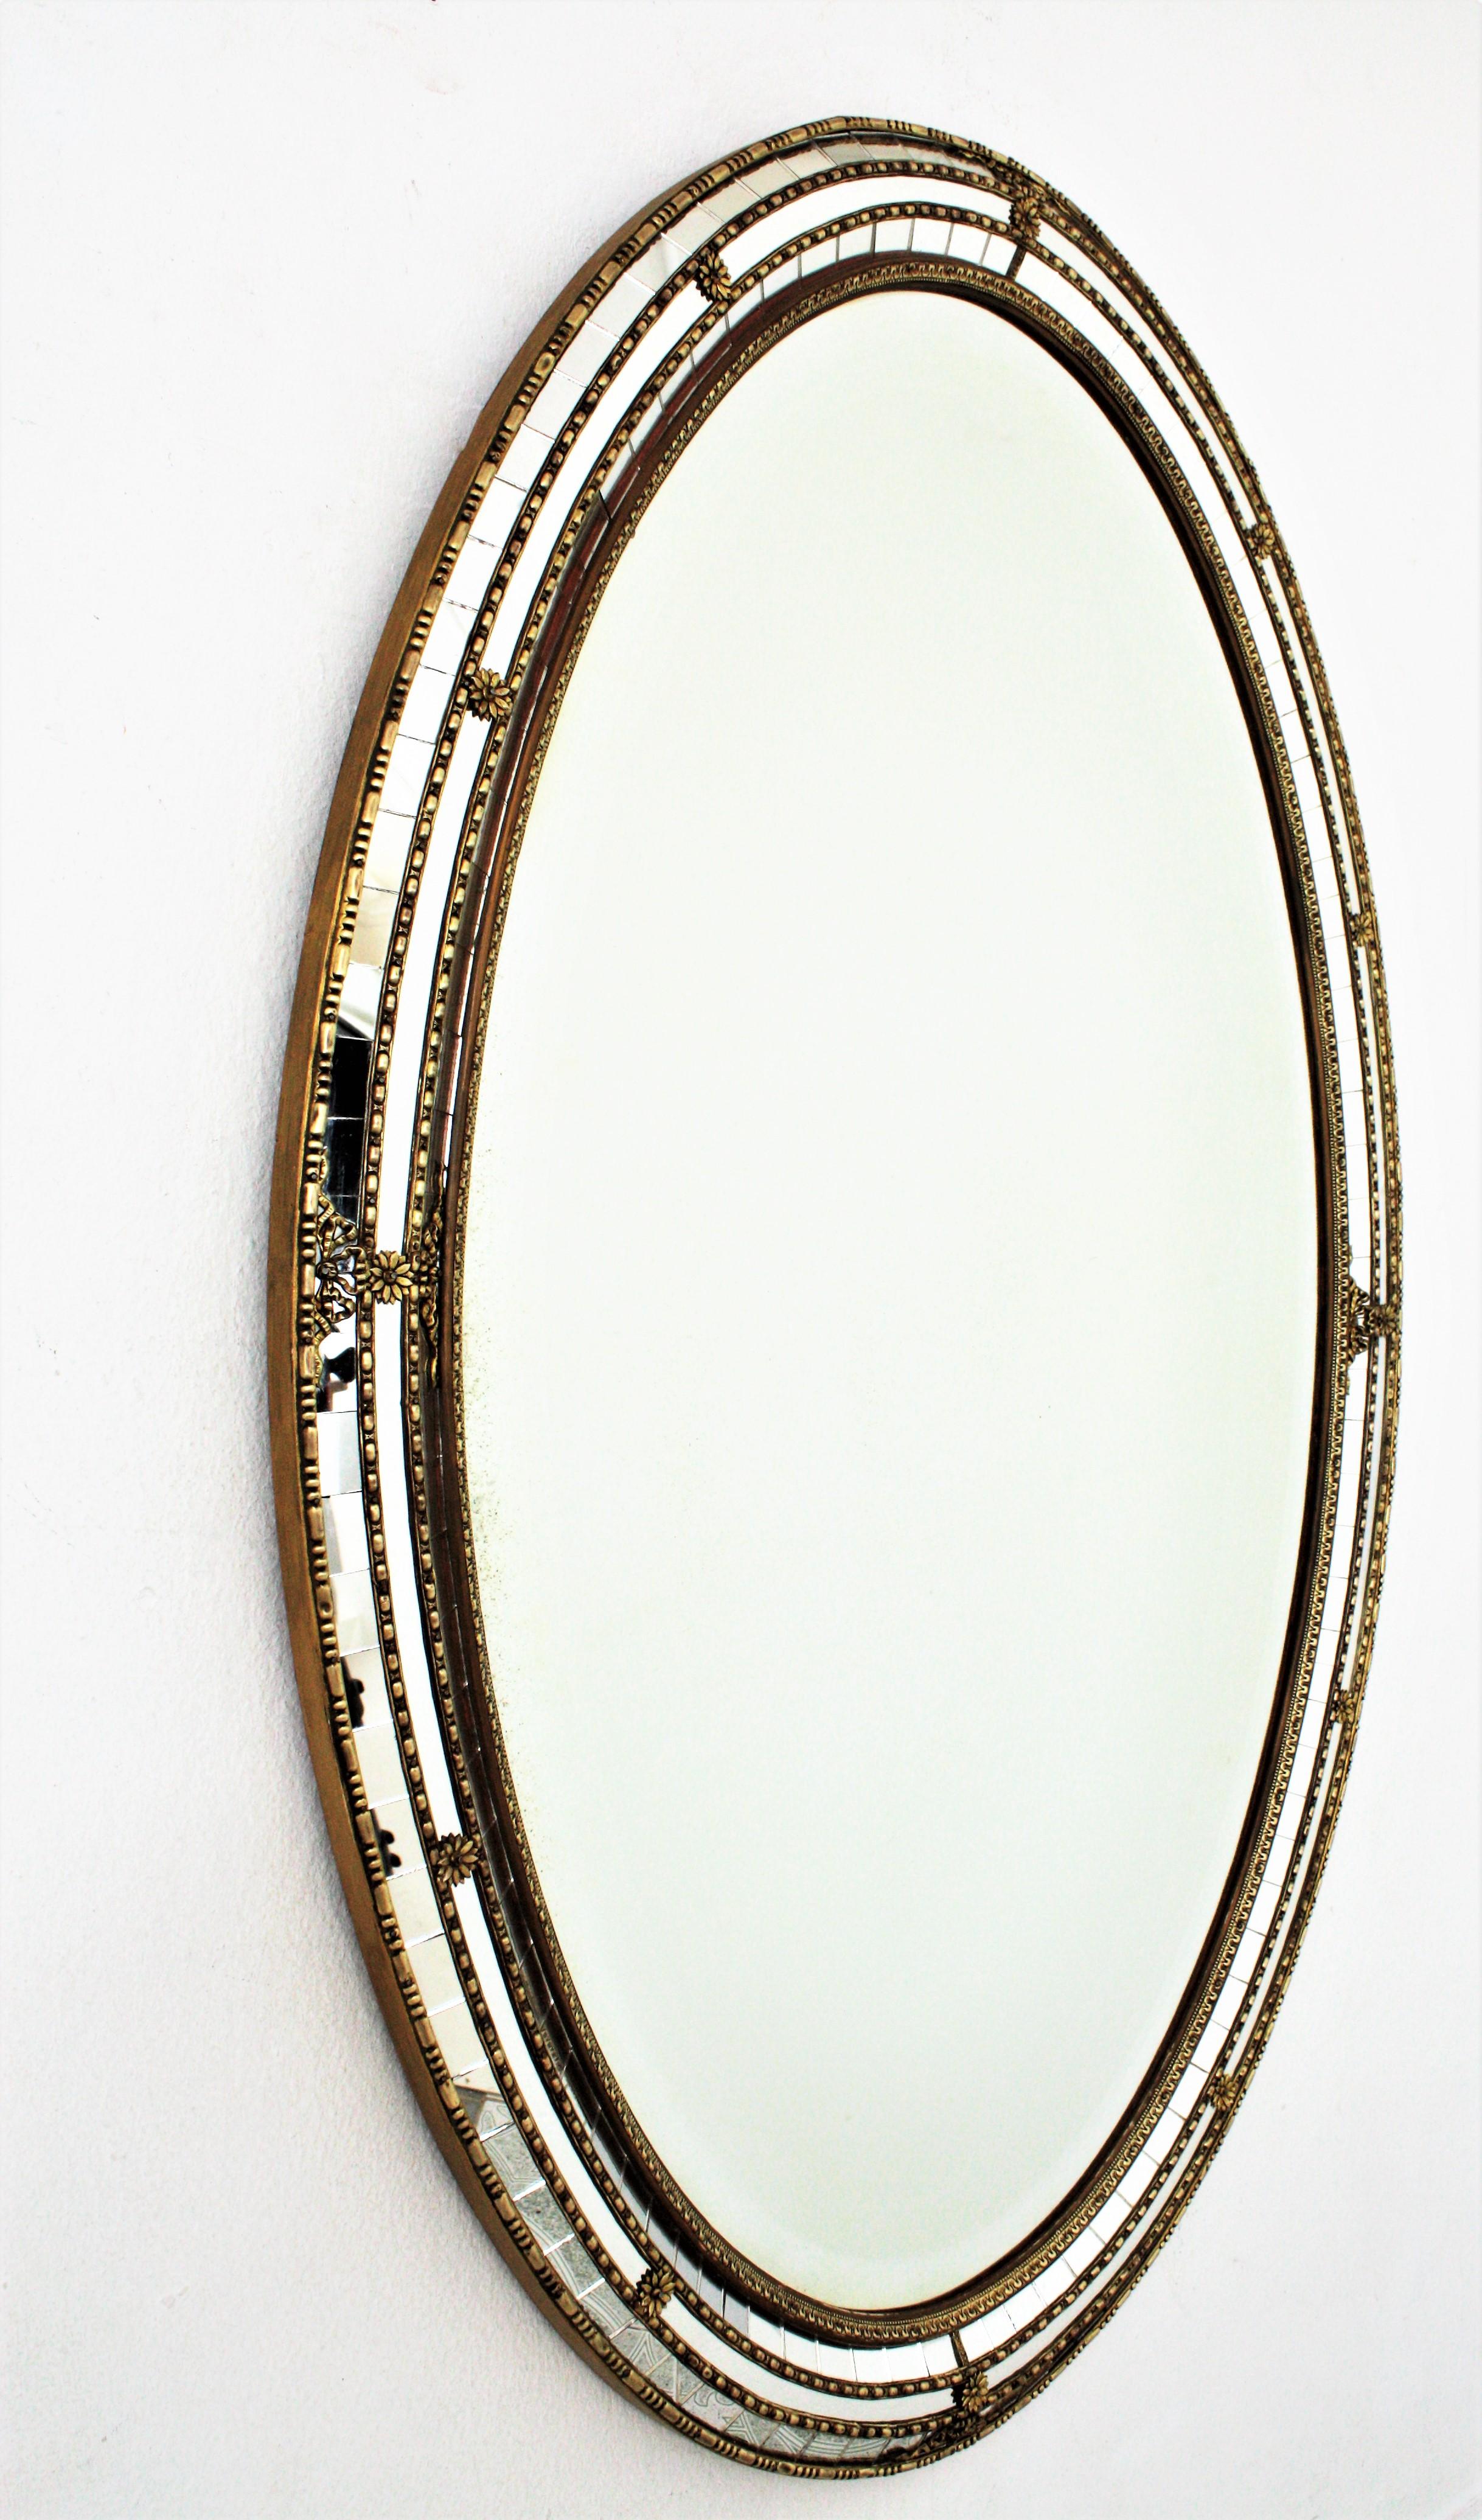 Hollywood Regency Venetian Style Oval Mirror with Beveled Glass and Brass Accents, 1950s